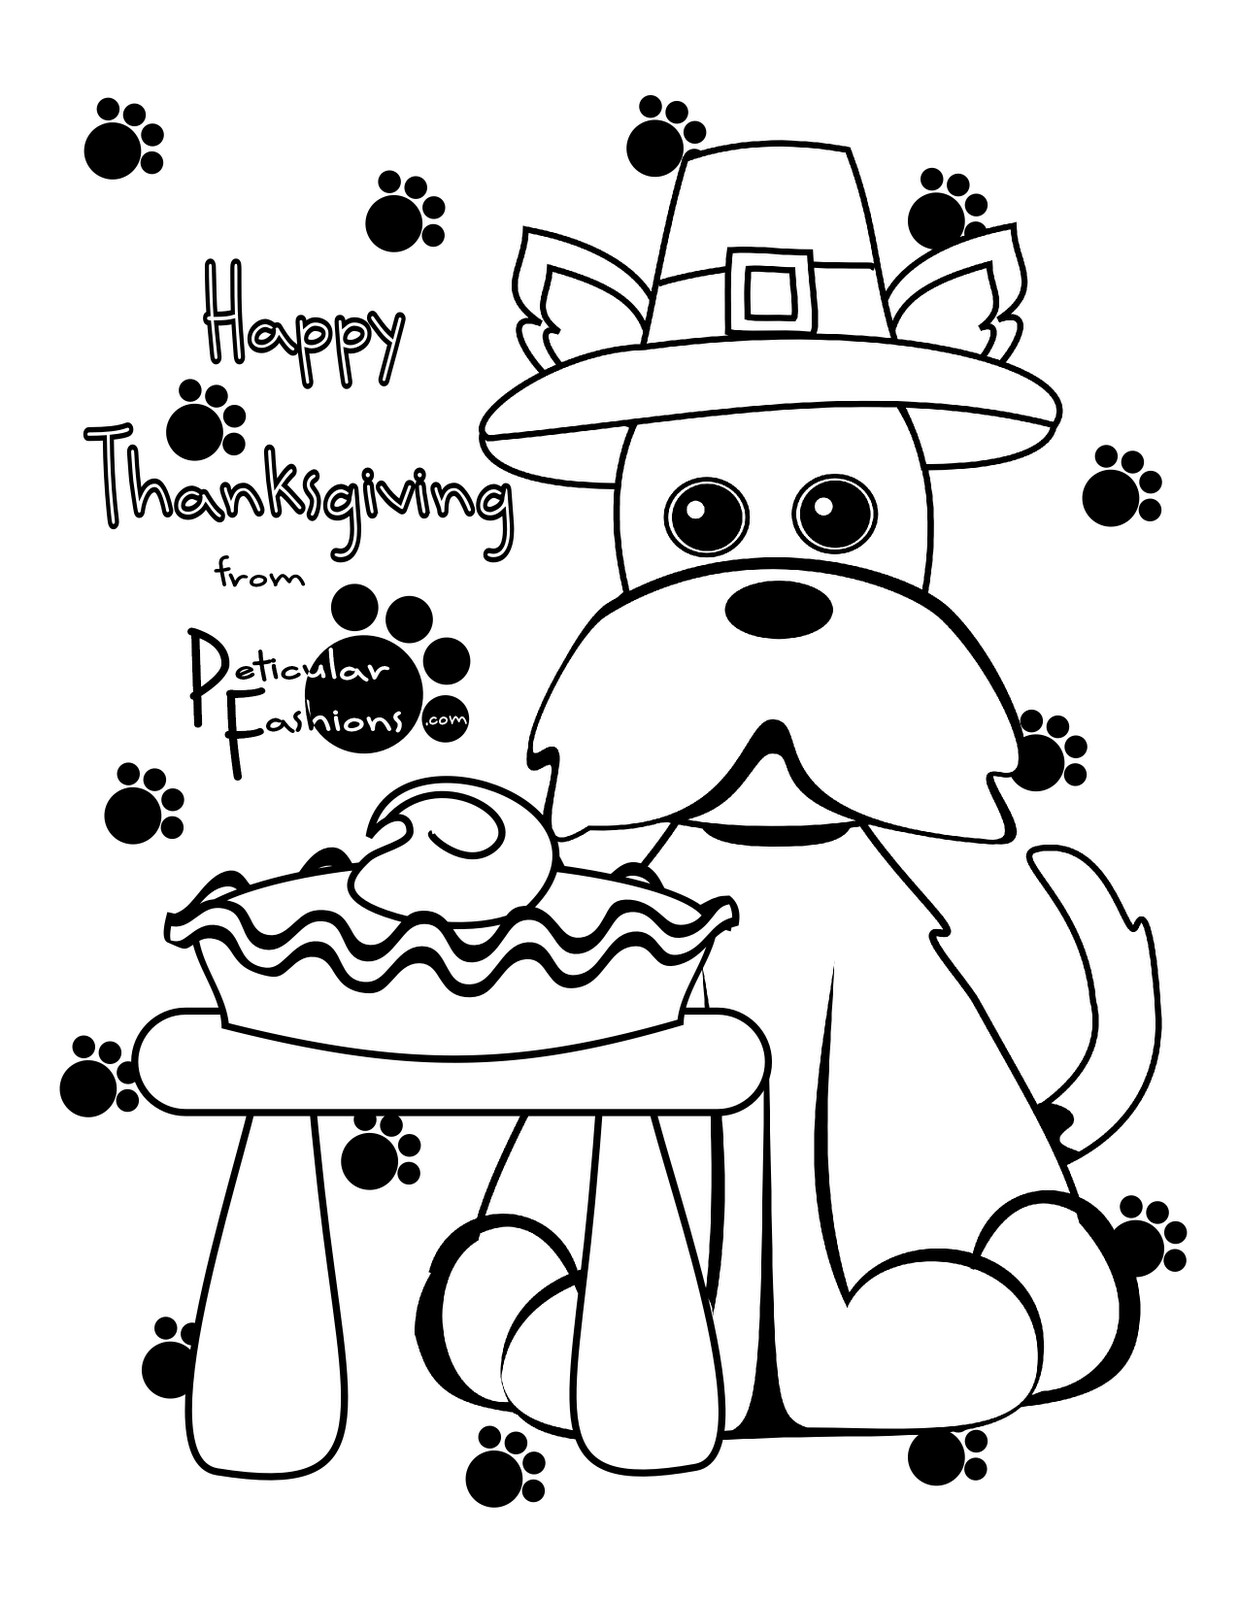 Thanksgiving Coloring Pages For Kids
 ThanksGiving Coloring Pages Free Printable